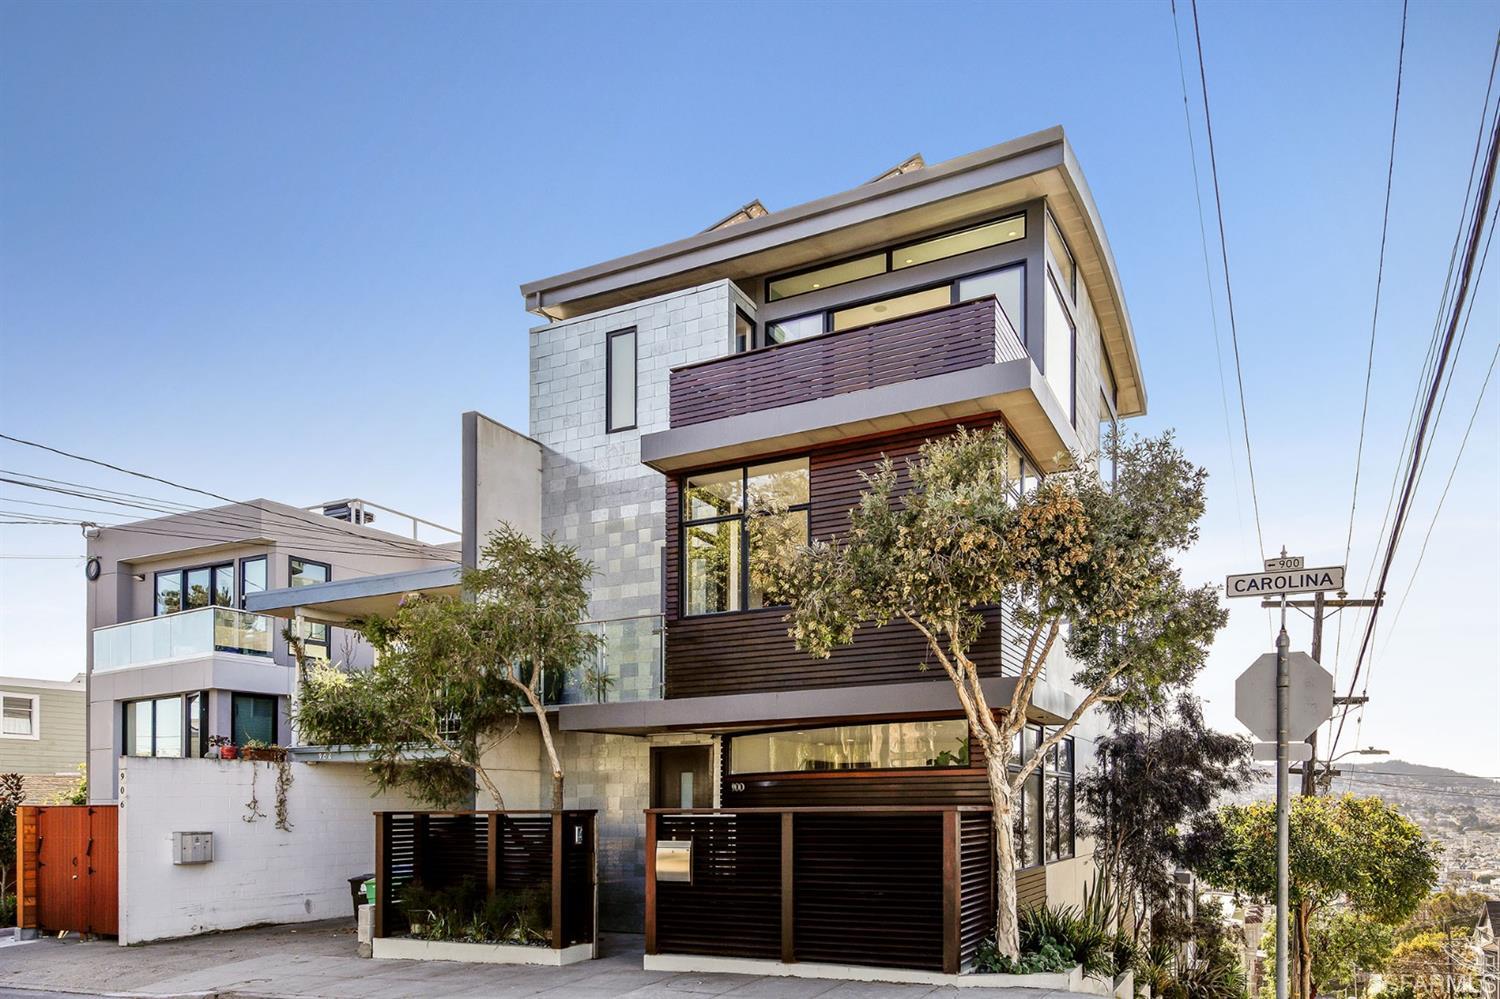 Welcome to this John Lum architectural masterpiece at the top of Potrero Hill. The exterior boasts sleek clean lines with custom-crafted Ipe screening and galvanized steel shingles.